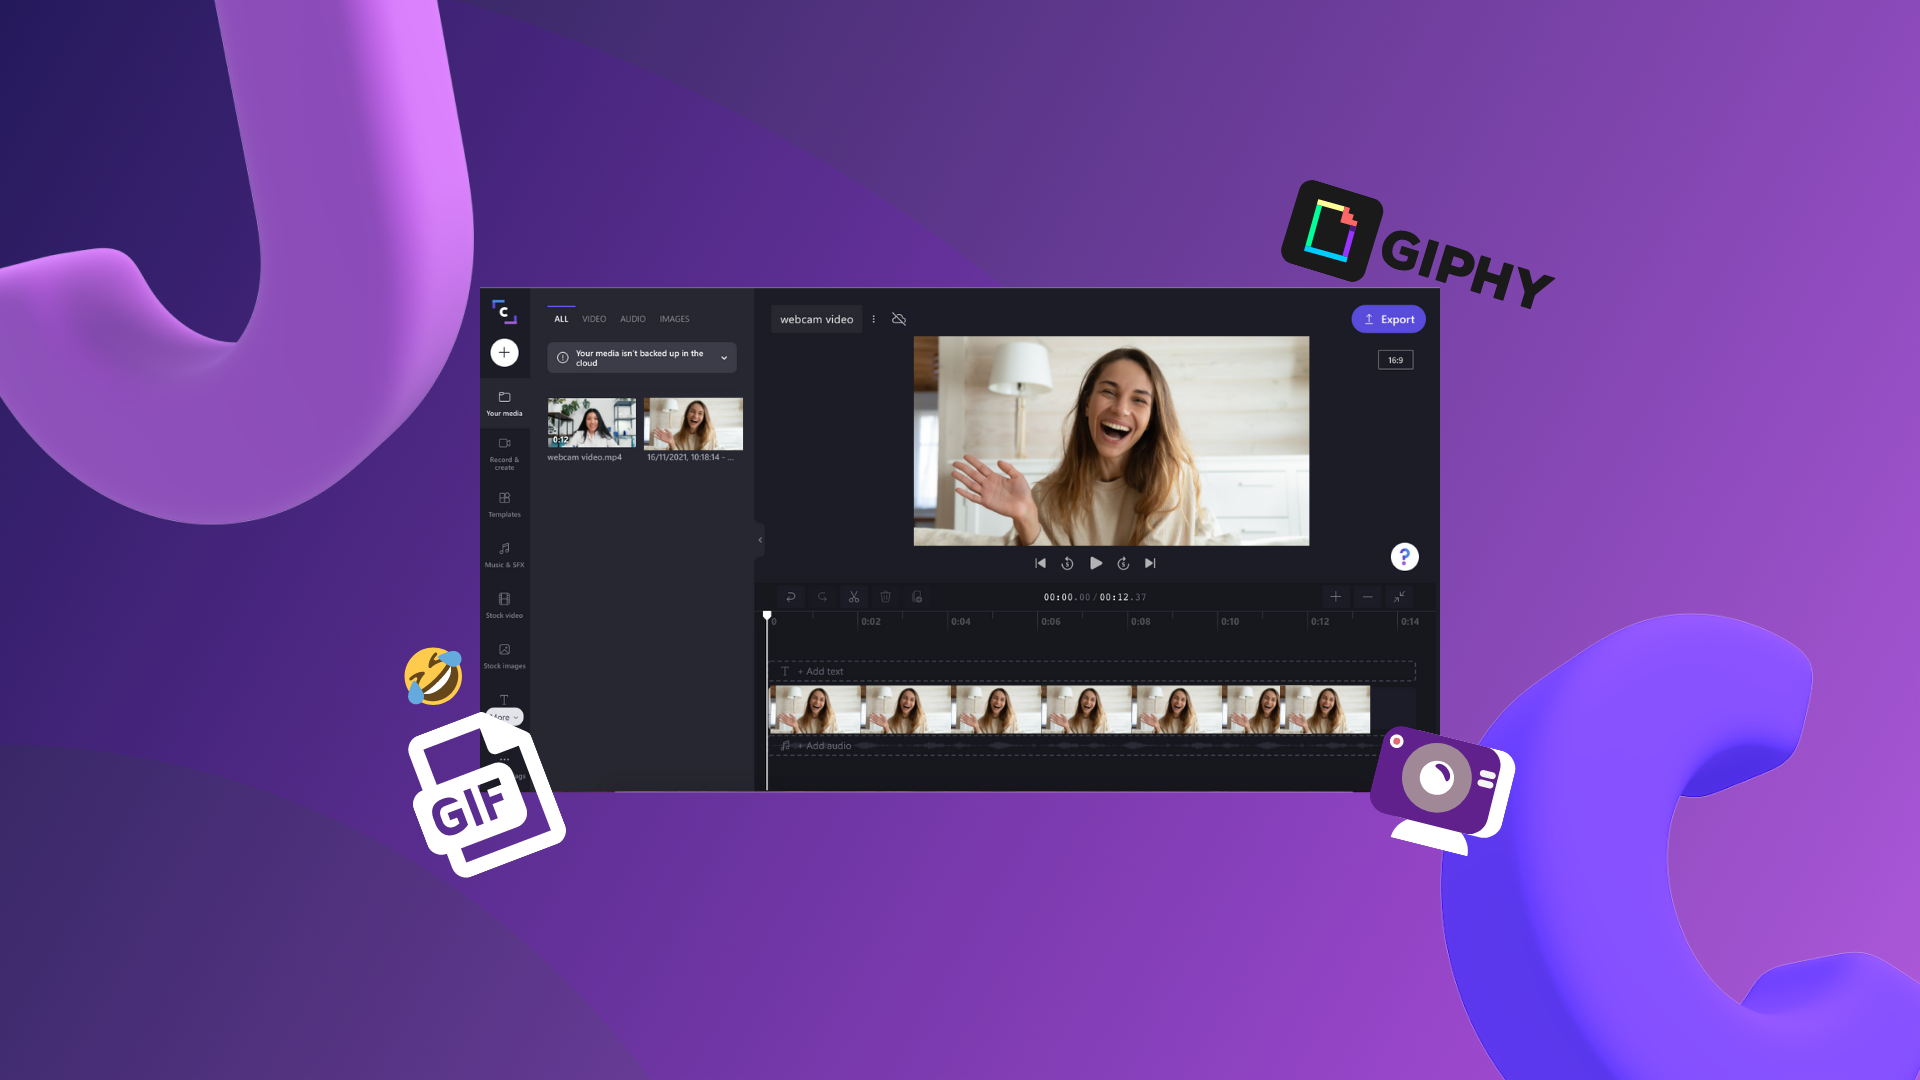 How to create a GIF using your webcam